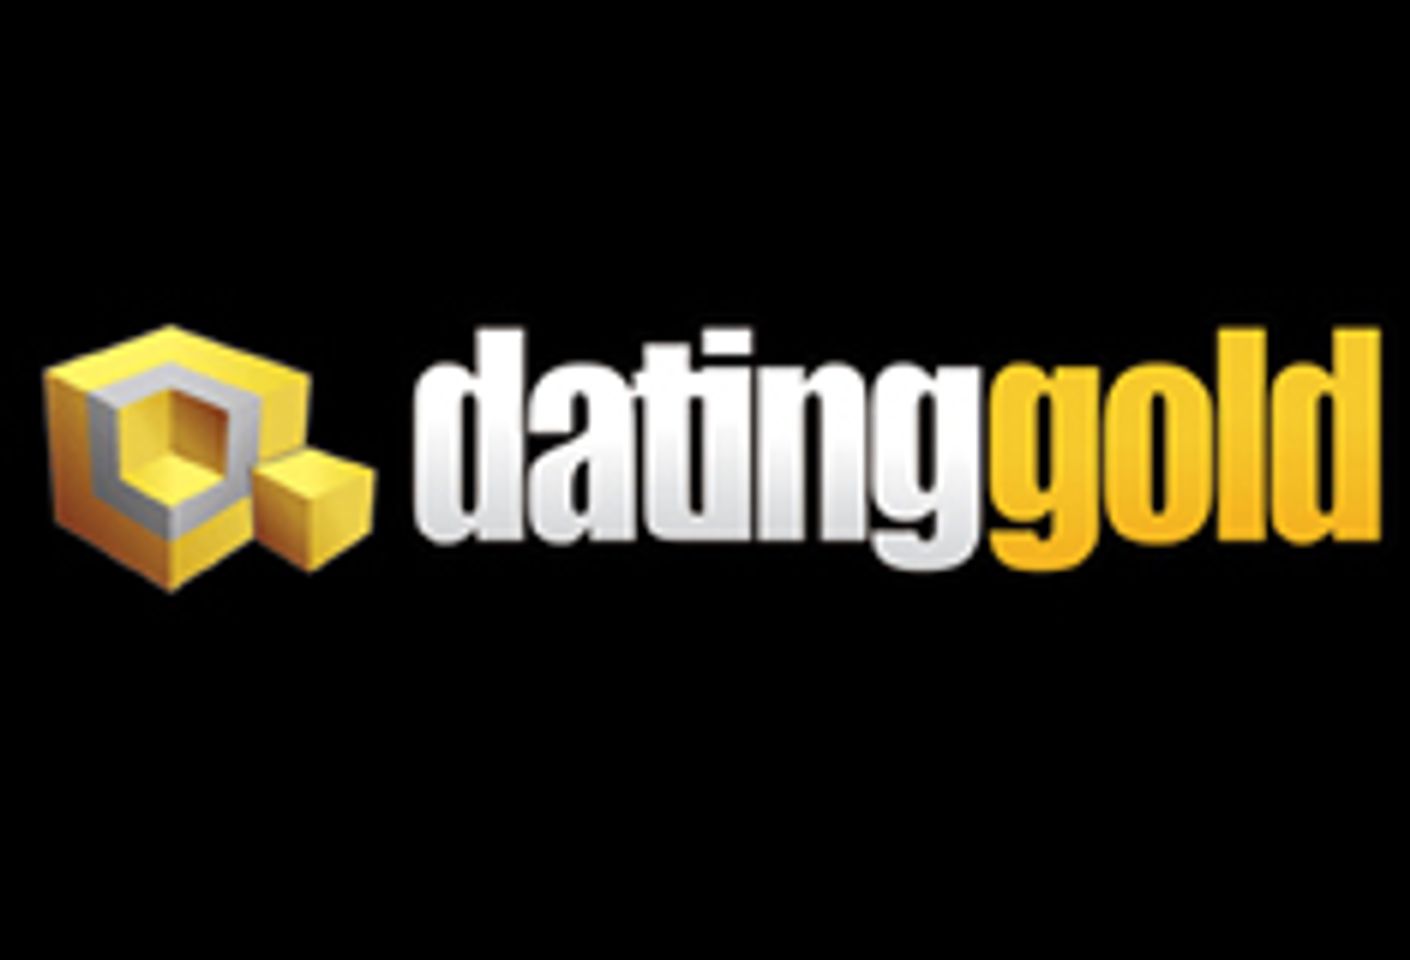 DatingGold.com Celebrates Nine Years Online by Adding New Affiliate Site